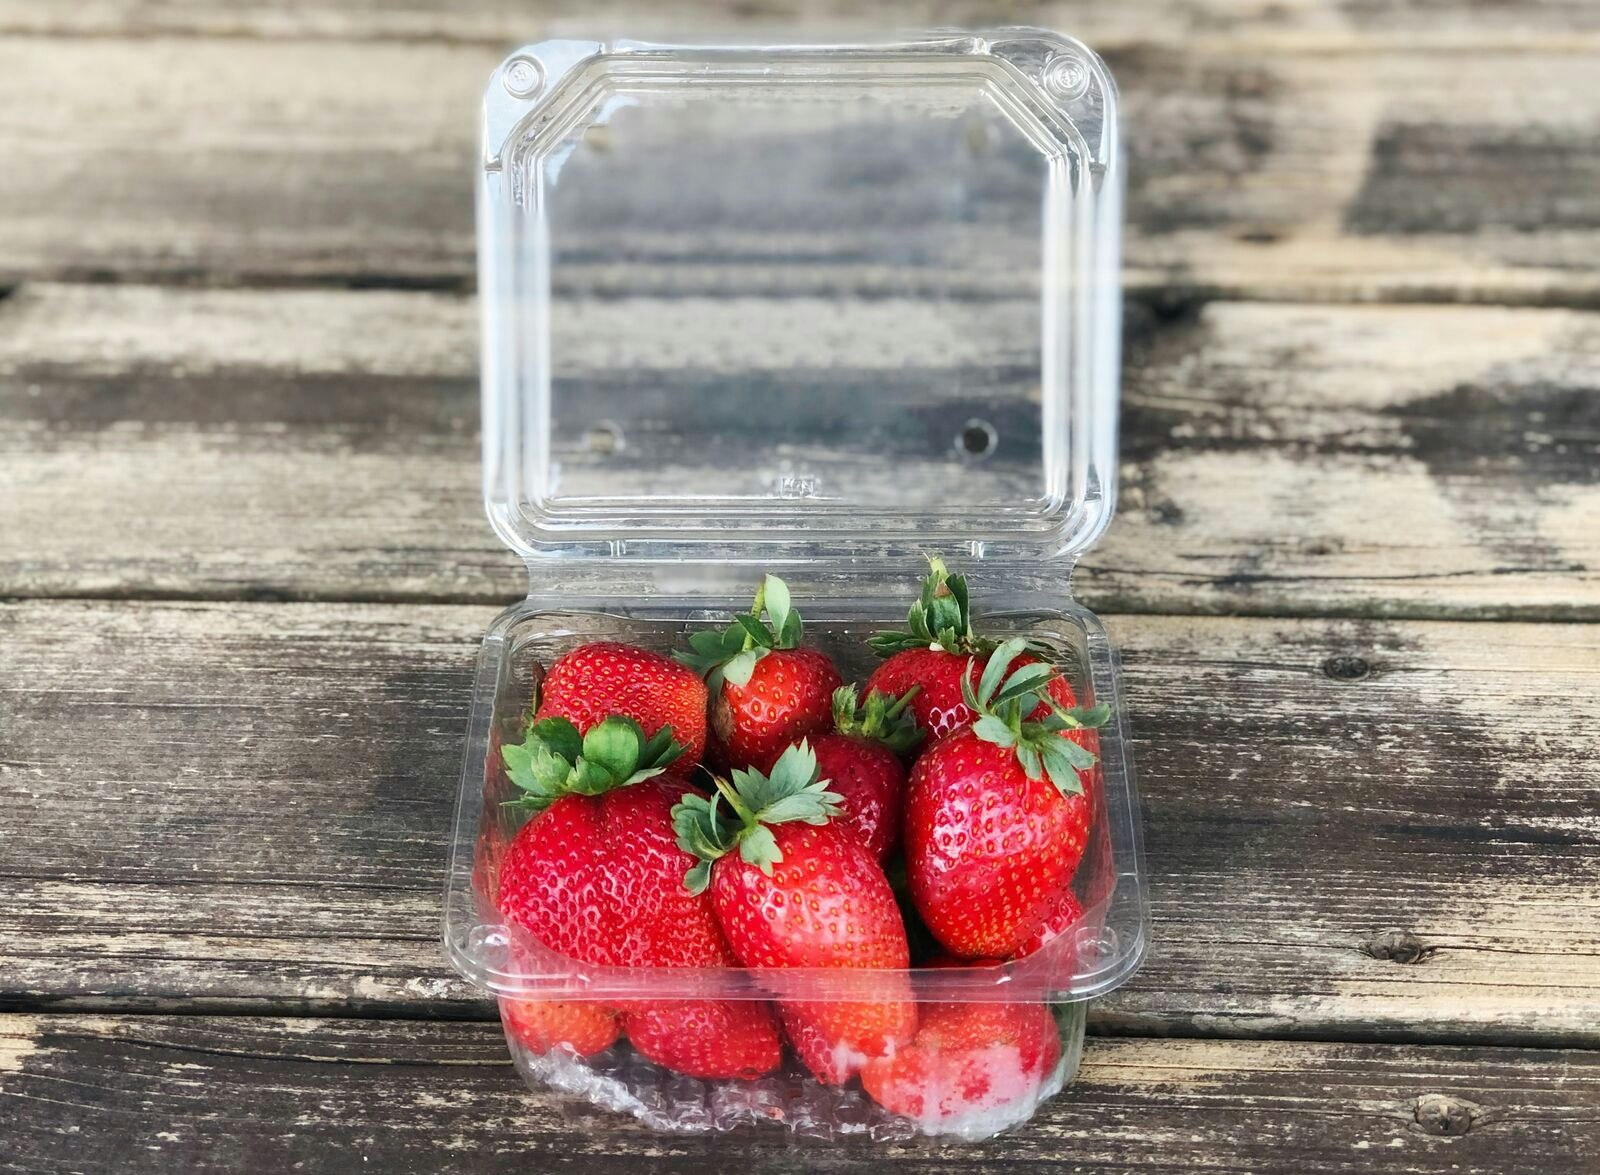 Strawberries in Plastic Tray